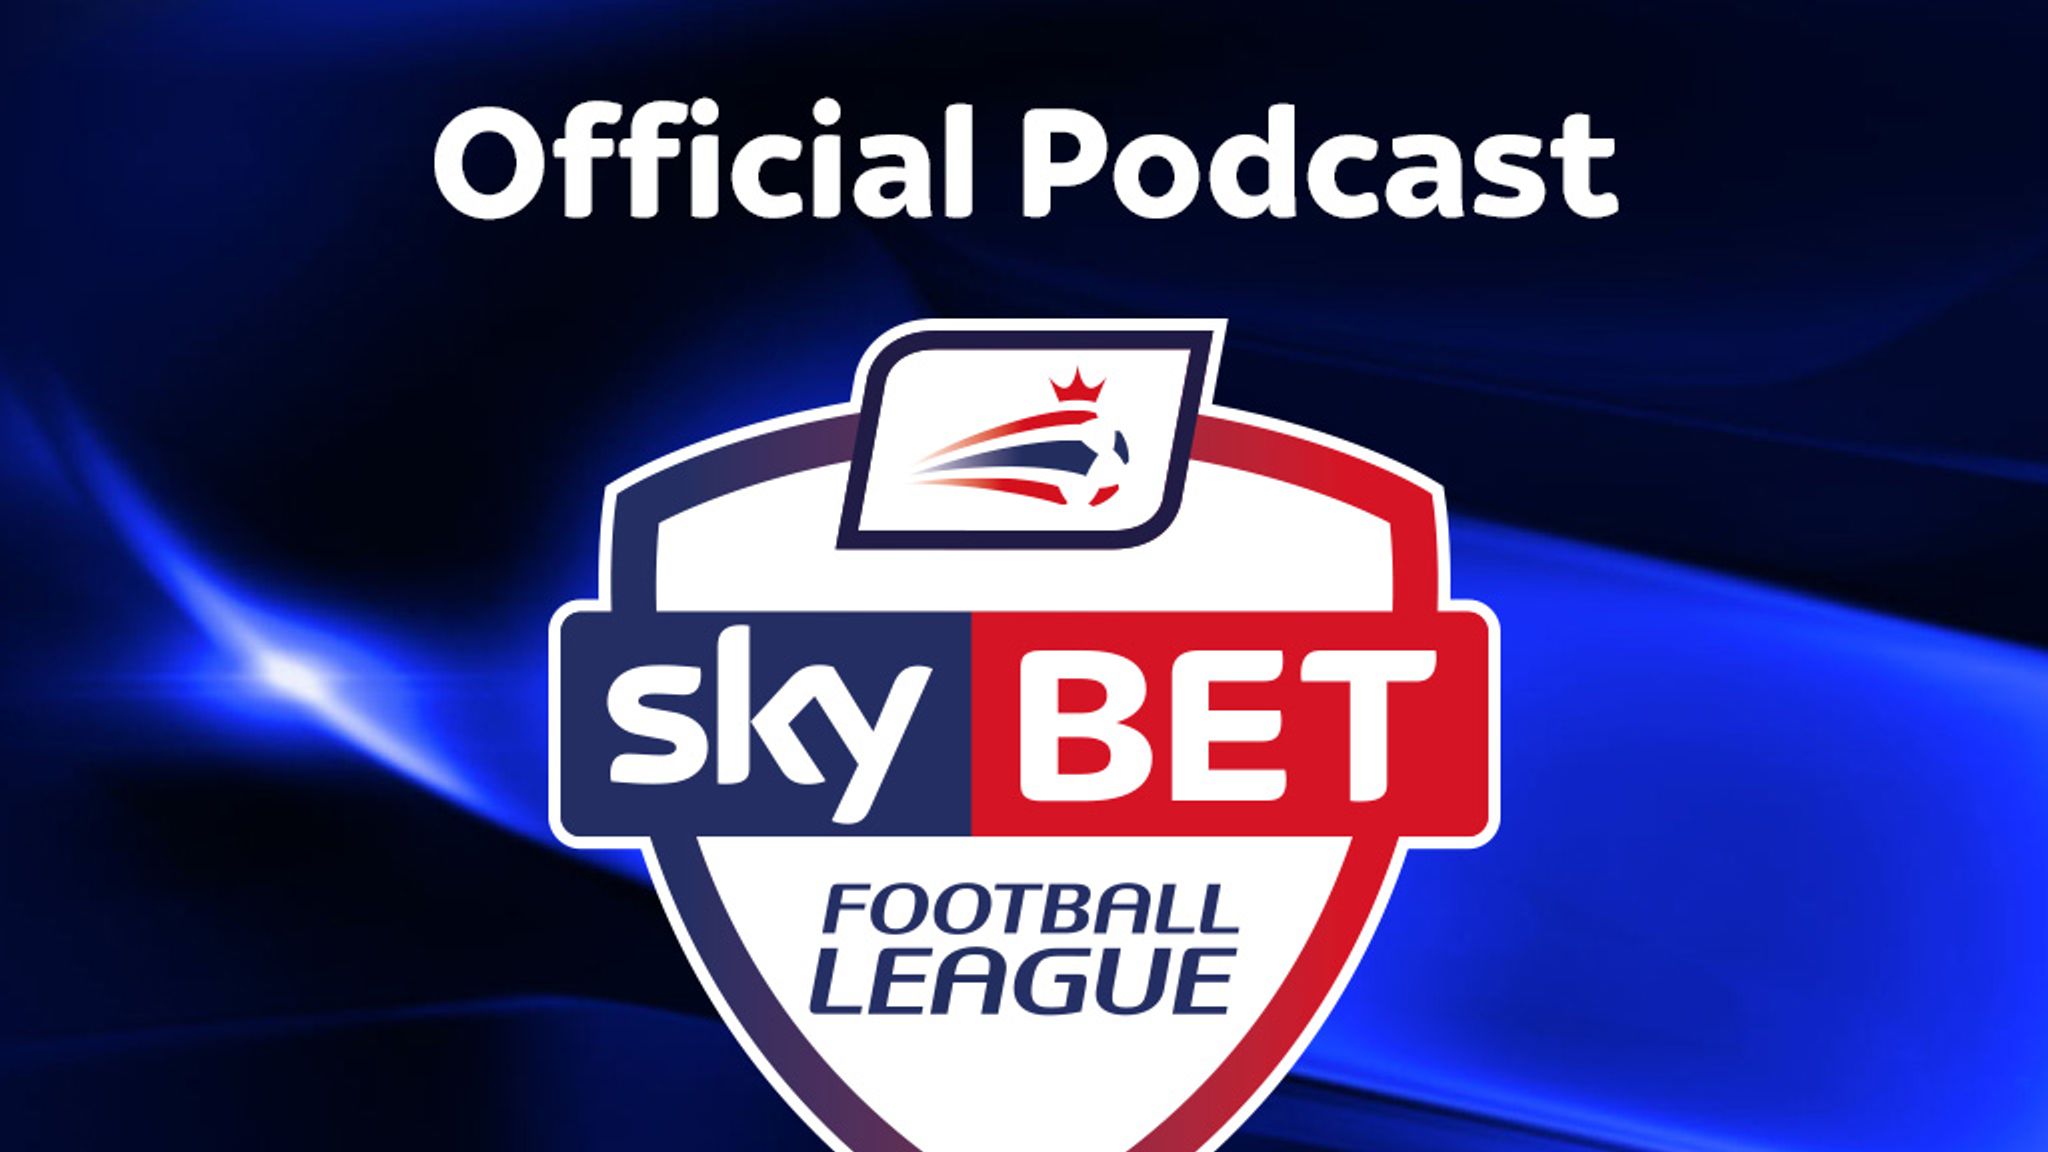 Football League Podcast: Sky Bet season preview with Kevin Davies and ...